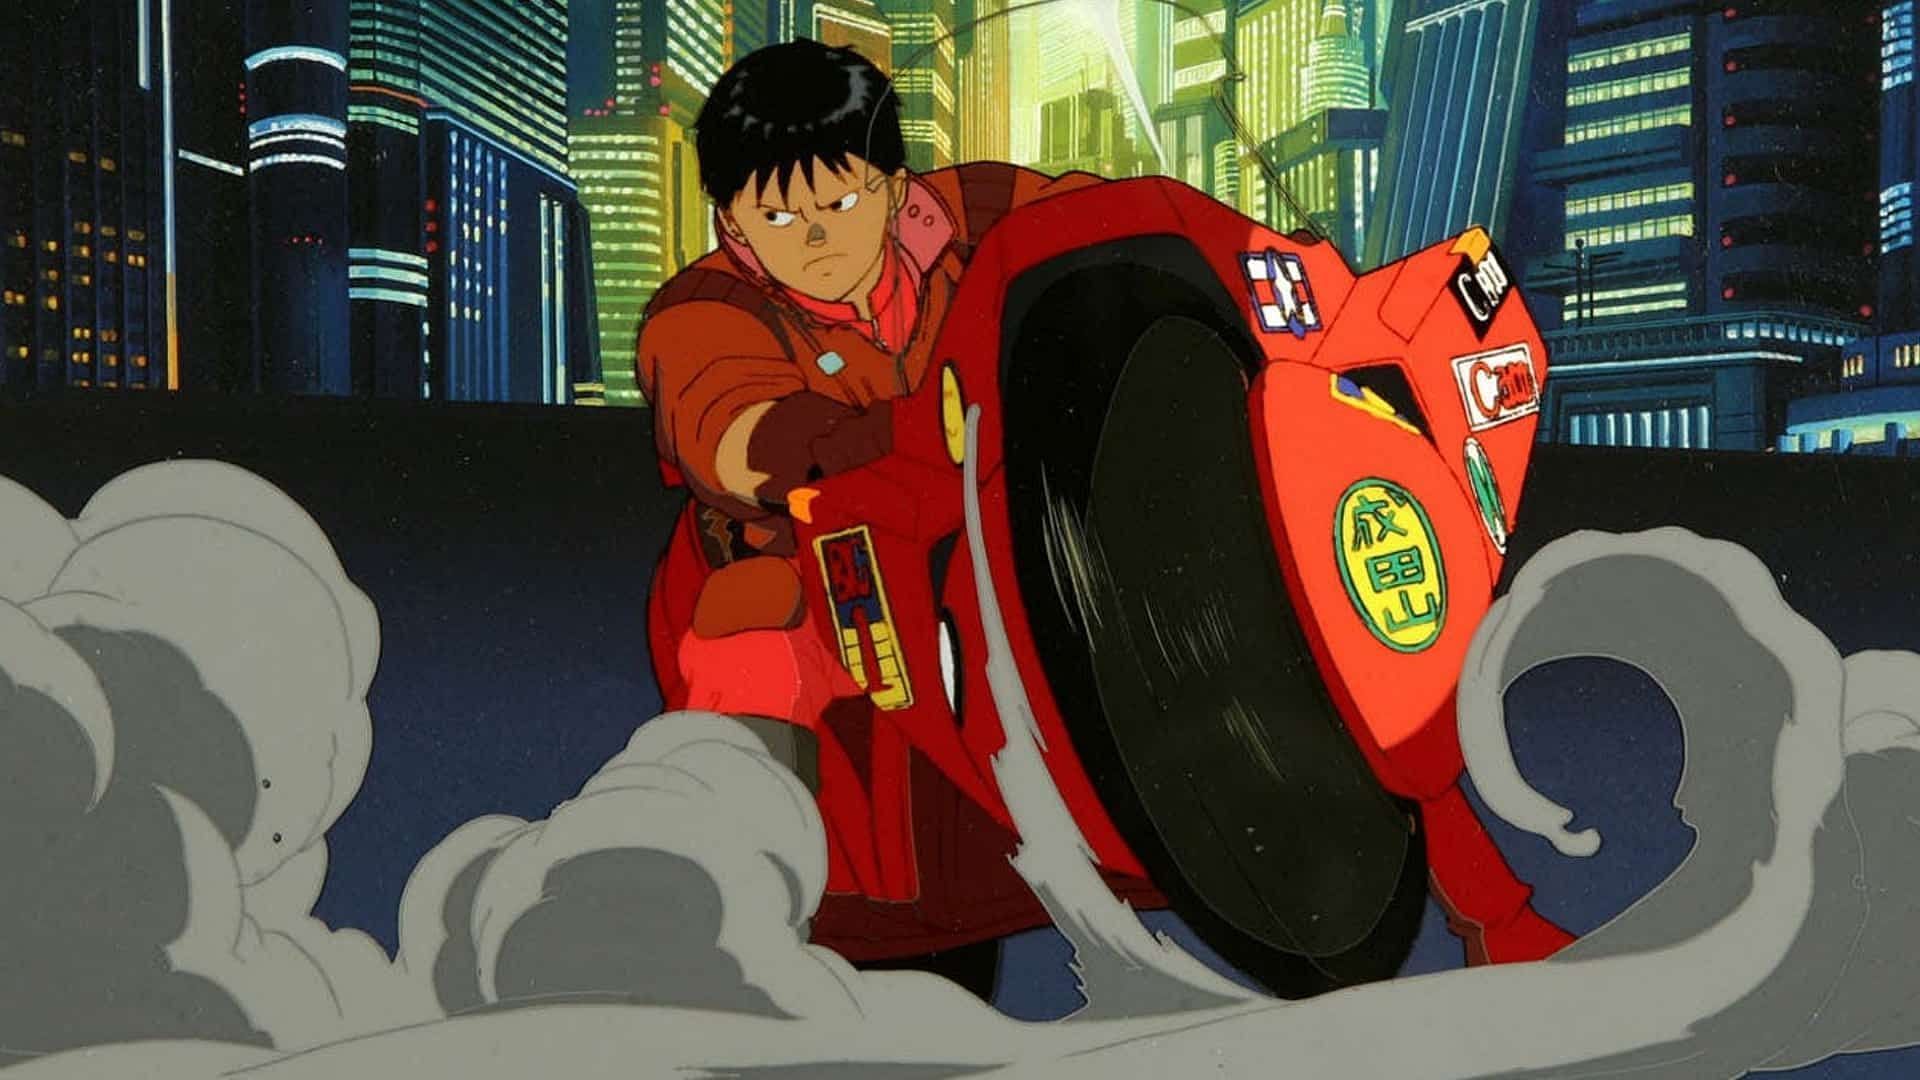 Akira Continues Its Renaissance With New Anime Series And 4K Remaster   Geek Culture